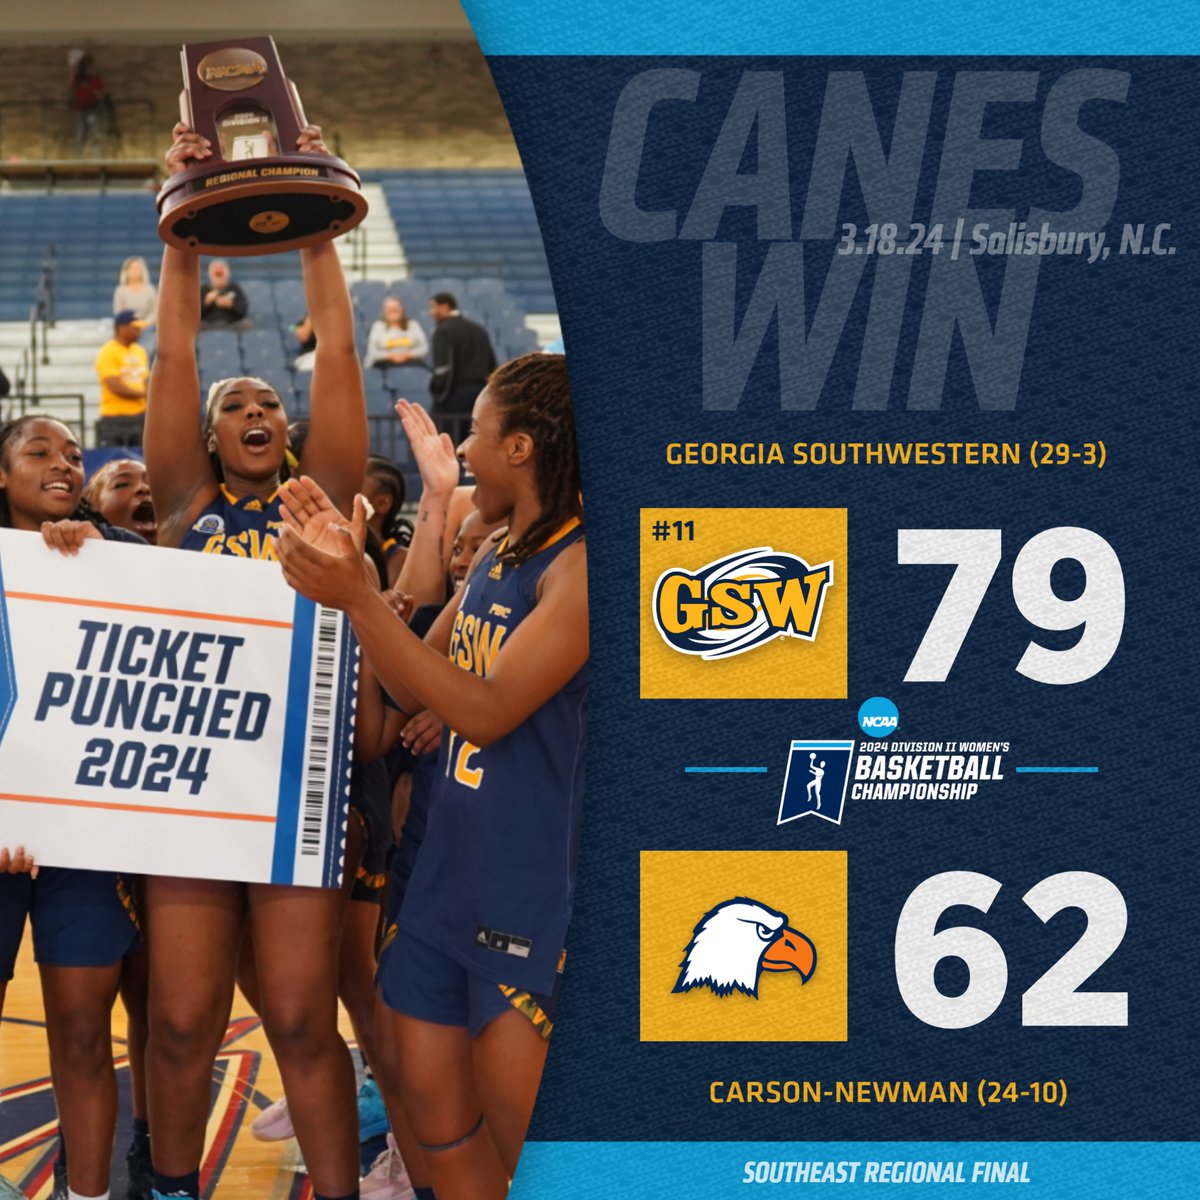 Bringing home some hardware! 🏆 NCAA DII Southeast Region 𝐂𝐇𝐀𝐌𝐏𝐒!

@GSW_WBasketball advances to the NCAA Tournament Elite 8 in St. Joseph, MO for 1st time in school history.

Ndidiamaka Ndukwe - 21 pts, 4-5 3-pt
Lexi McCully - 13 pts
Destiny Garrett - 11 pts, 7 reb
#D2WBB